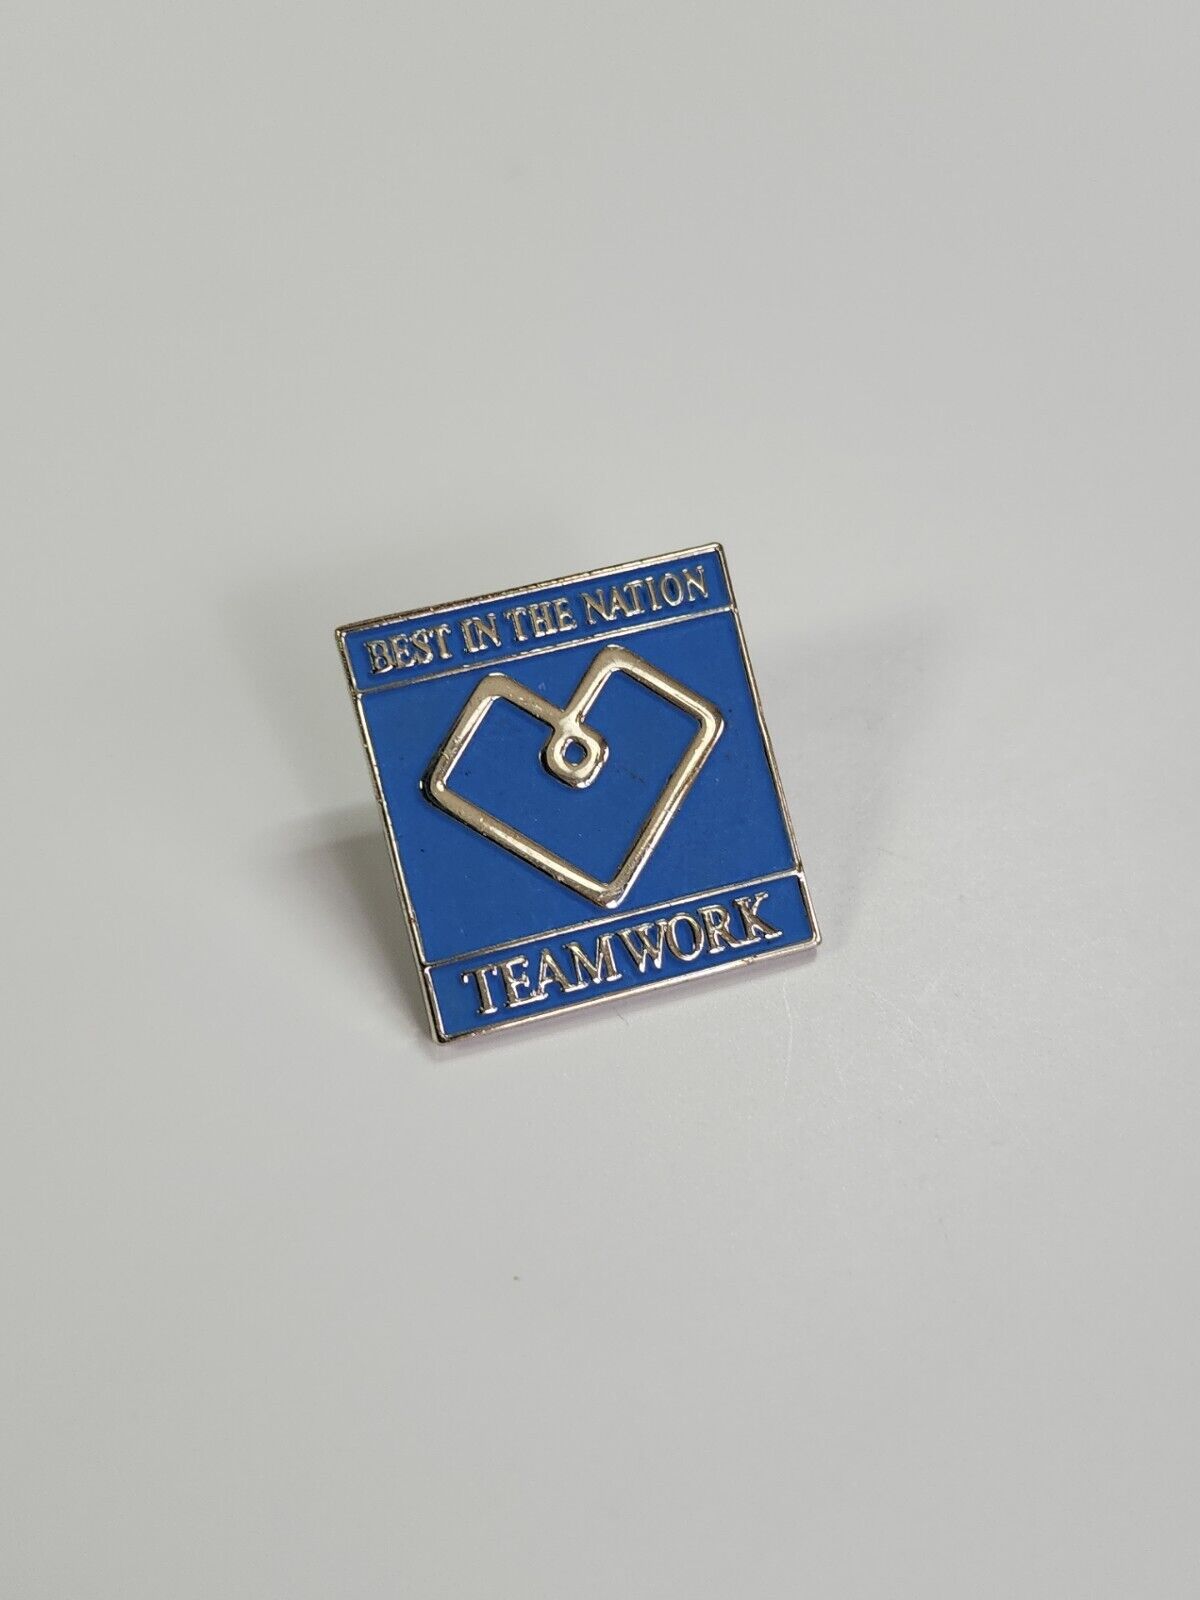 Best In The Nation Teamwork Lapel Pin Blue Color 